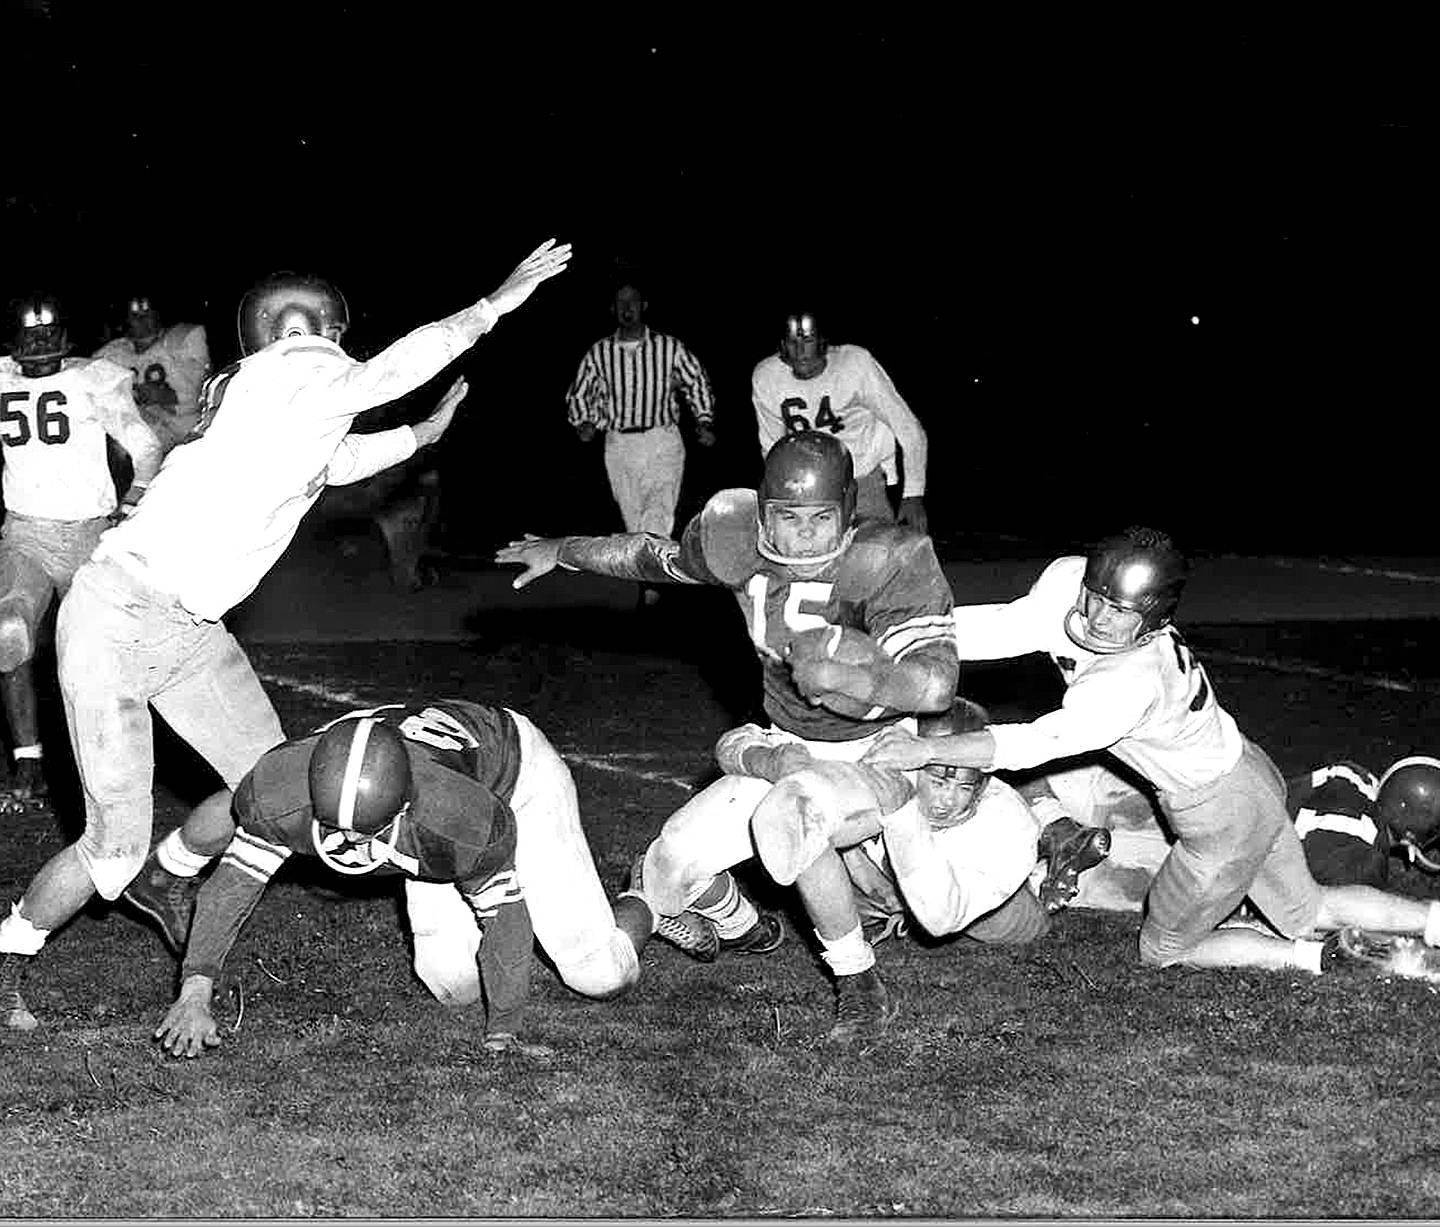 Sonny Luke (No. 15) was the leading rusher for the 1960 Port Angeles High School football team, scoring 18 touchdowns that season. He went on to play at Grays Harbor Community College and Oregon Tech.